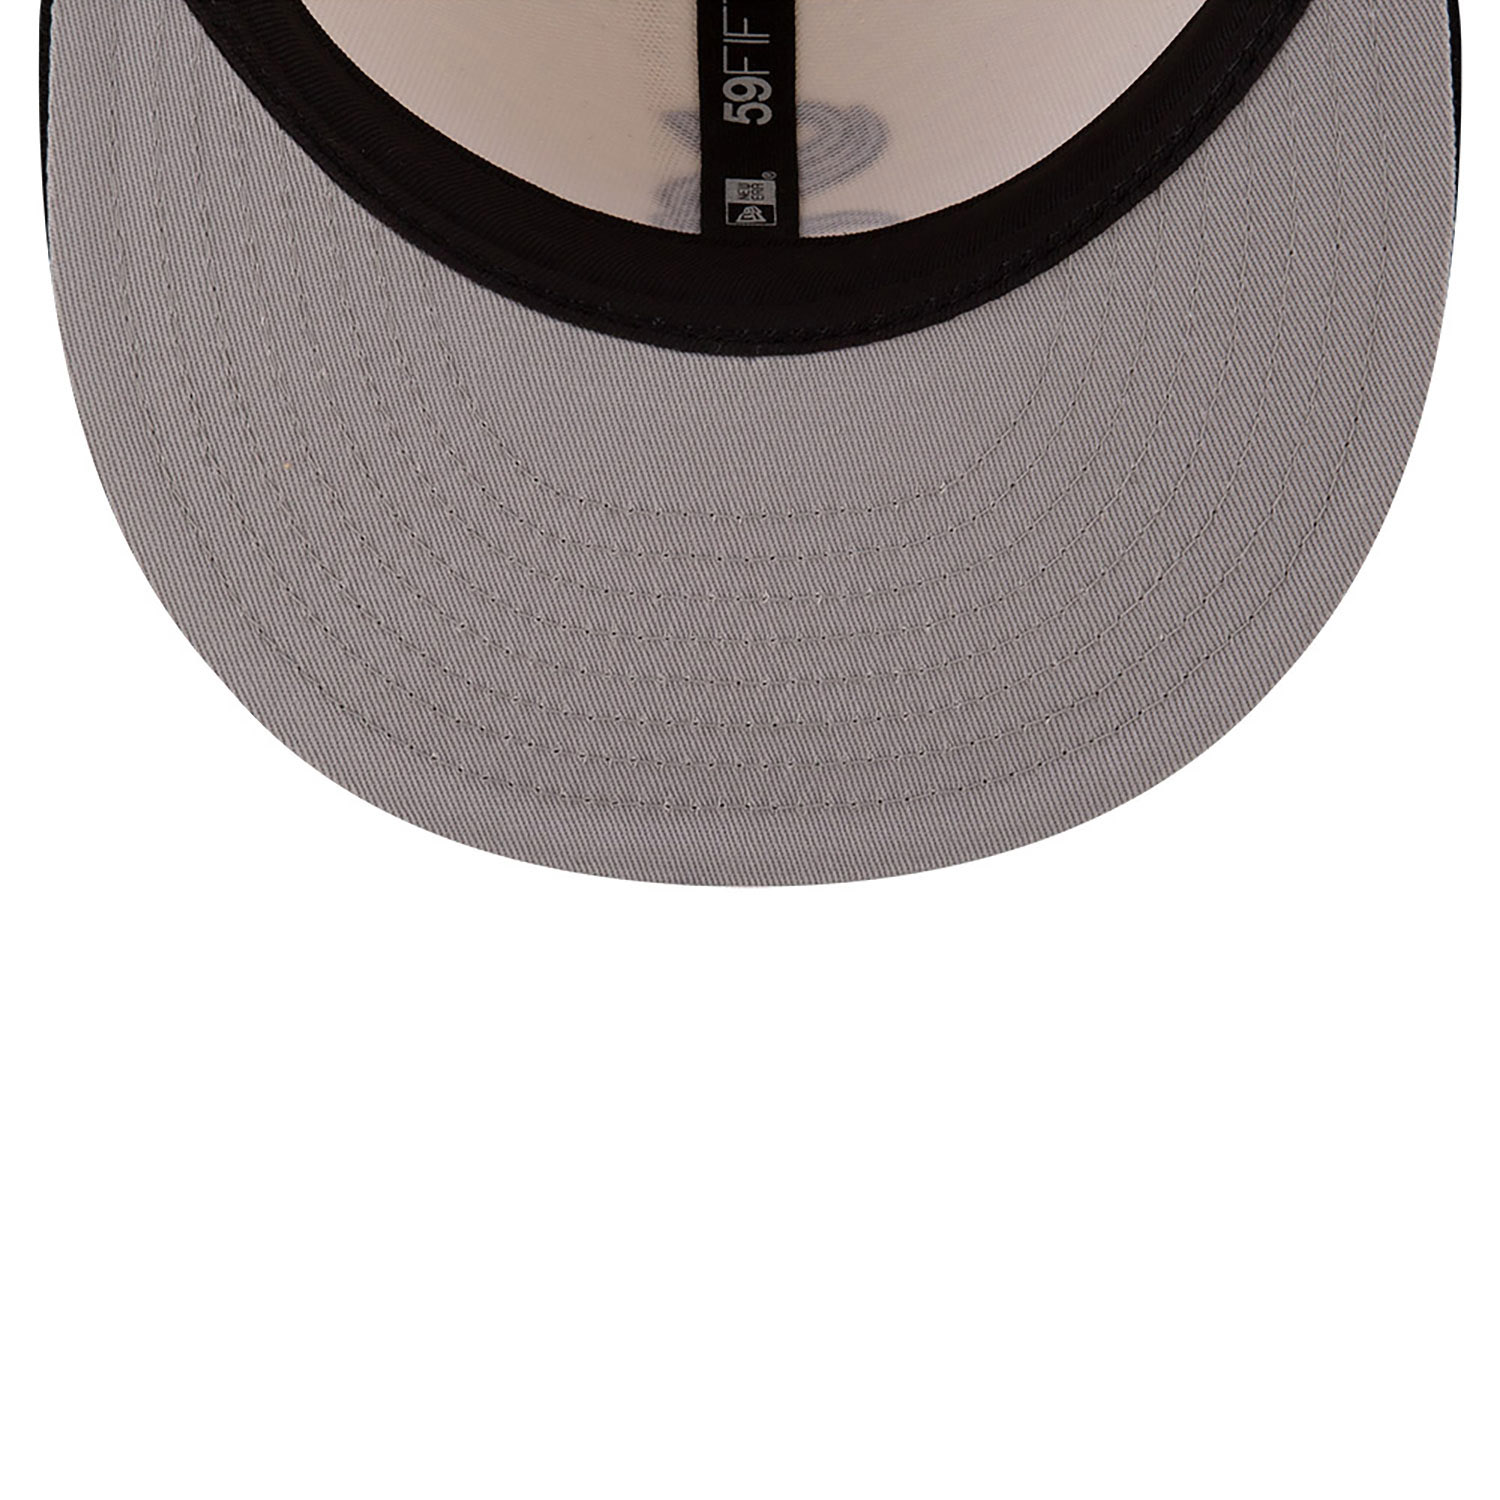 Chicago White Sox Leather Visor Chrome White 59FIFTY Fitted Cap